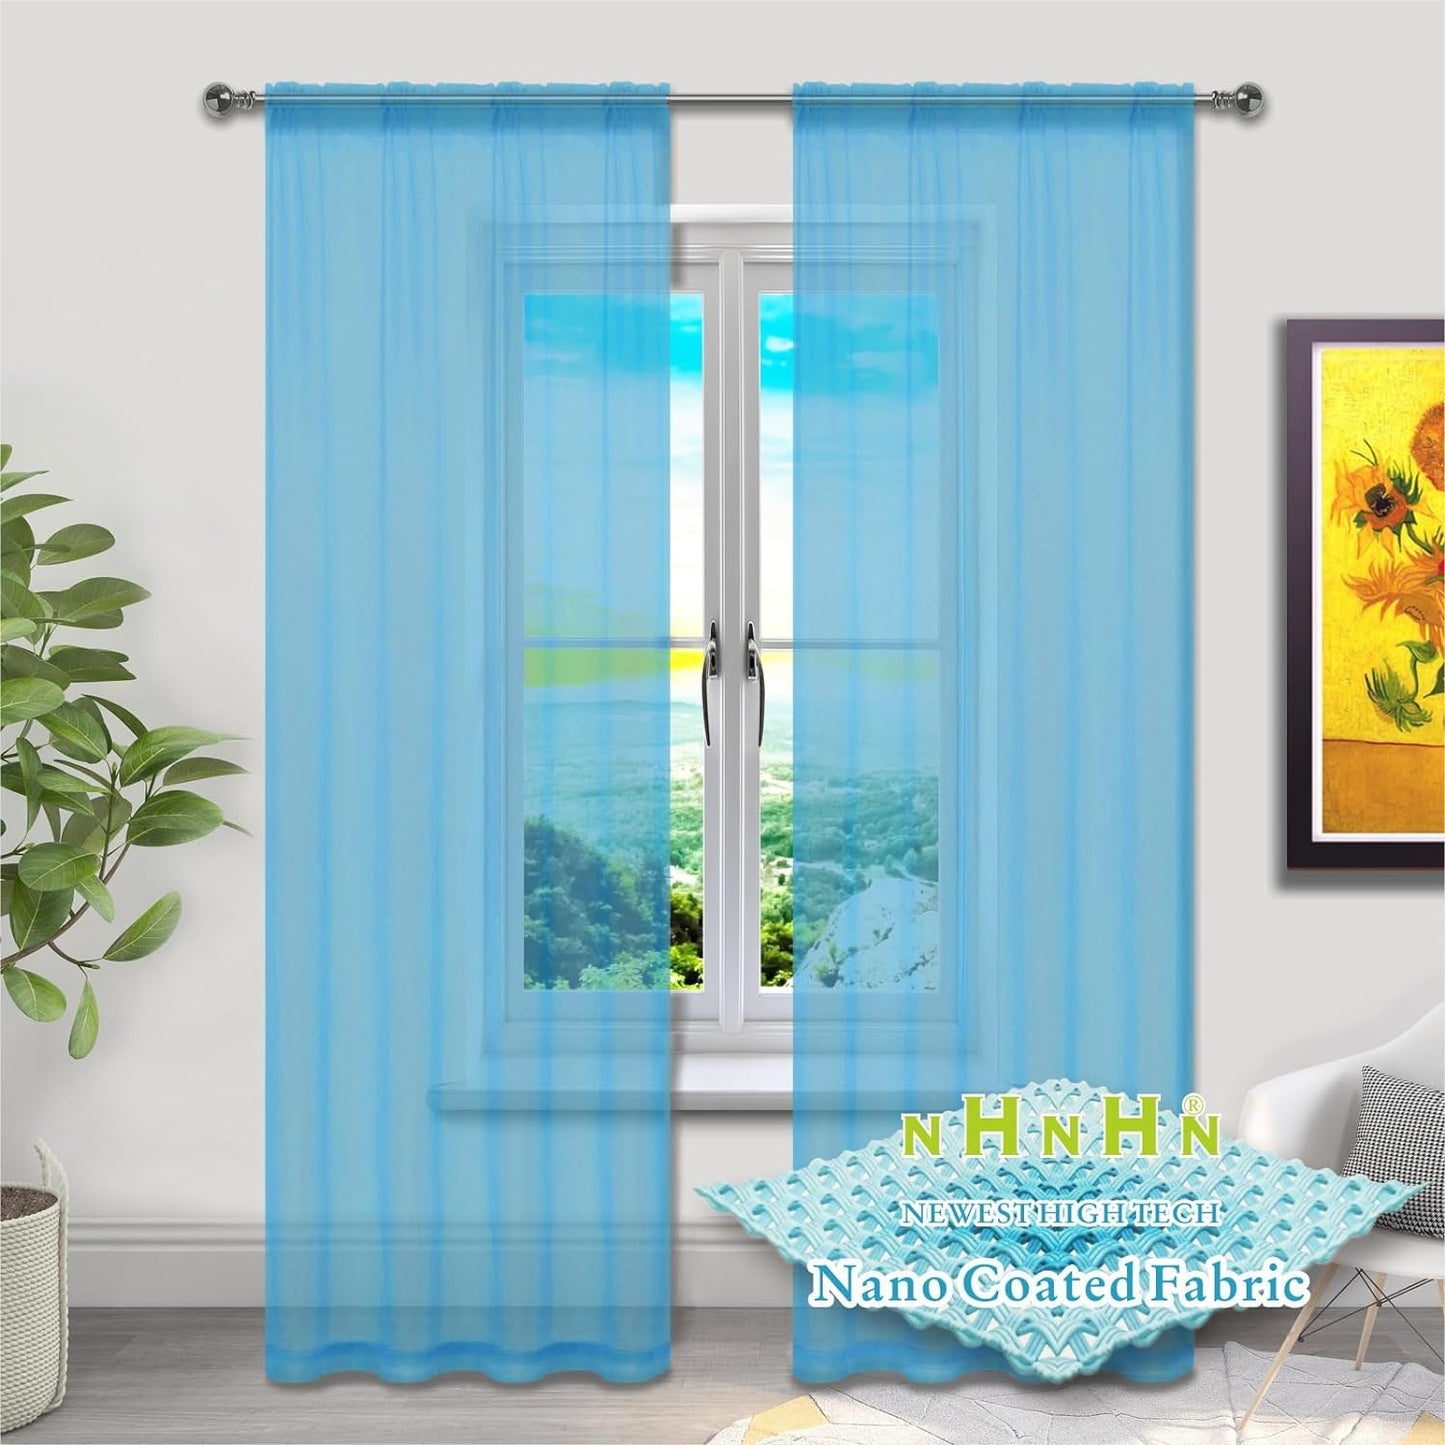 NHNHN Nano Material Coated White Sheer Curtains 84 Inches Long, Rod Pocket Window Drapes Voile Sheer Curtain 2 Panels for Living Room Bedroom Kitchen (White, W52 X L84)  NHNHN Light Blue 52W X 72L | 2 Panels 